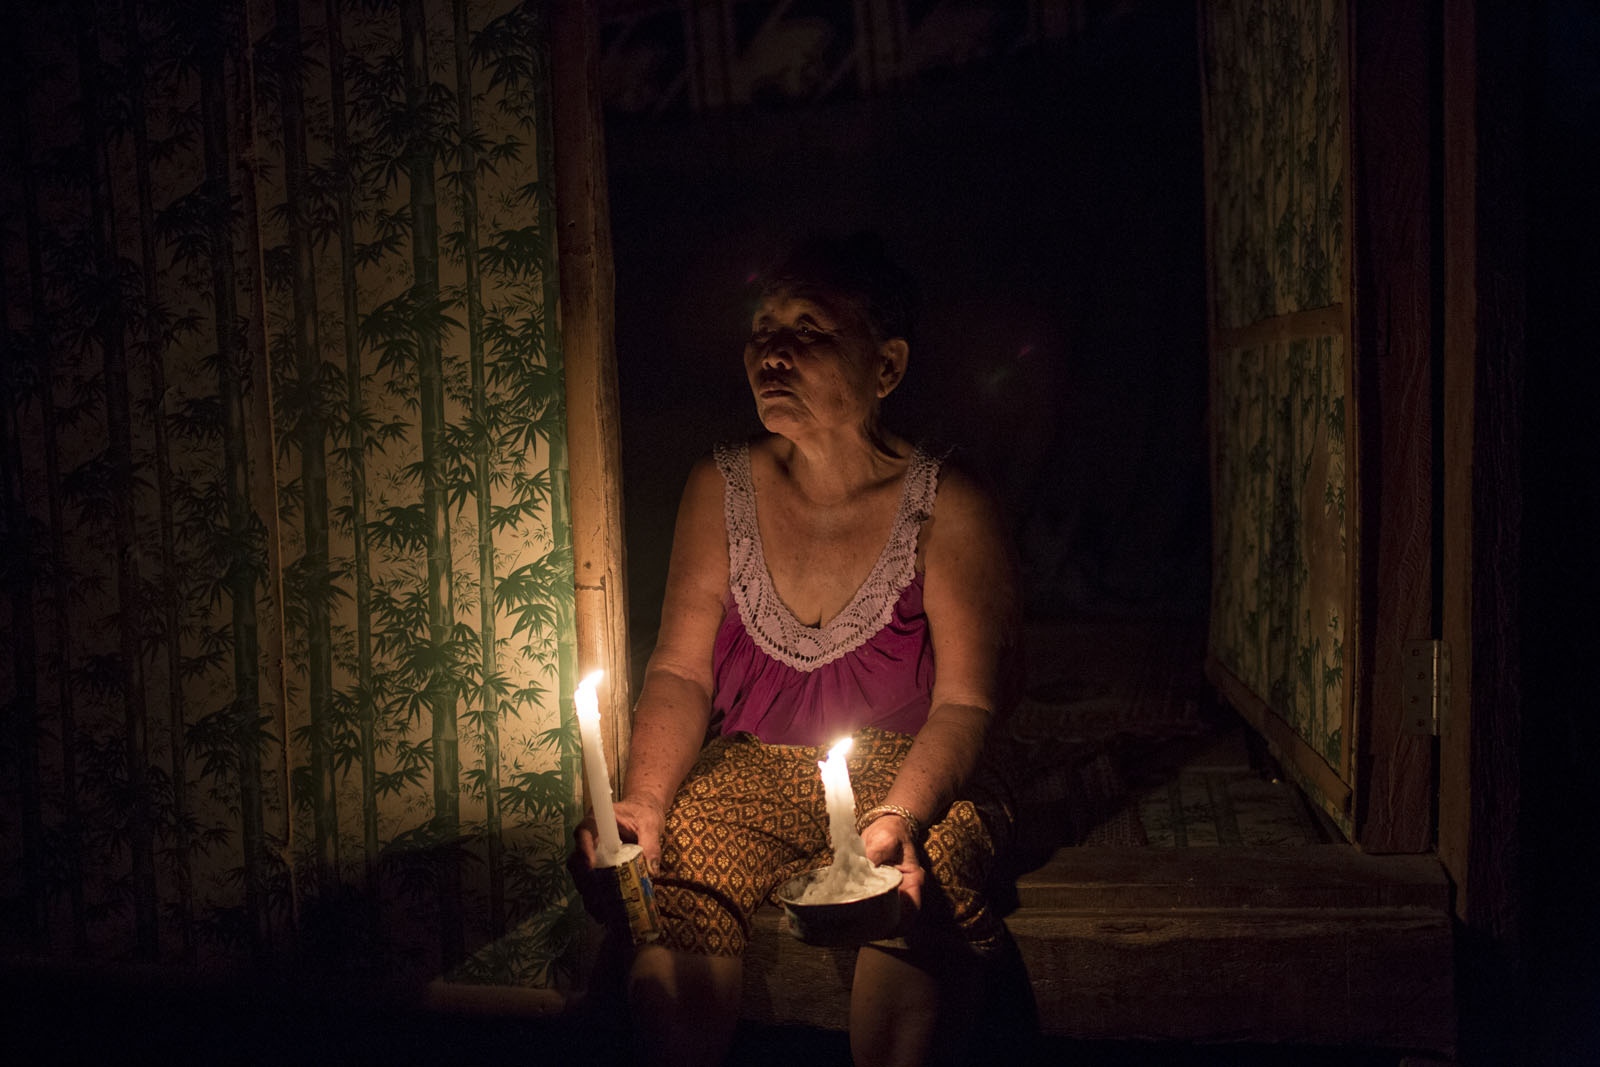 A VILLAGE UNDER SIEGE - Rattana Seli, 66, sits in the entrance to her hut holding...